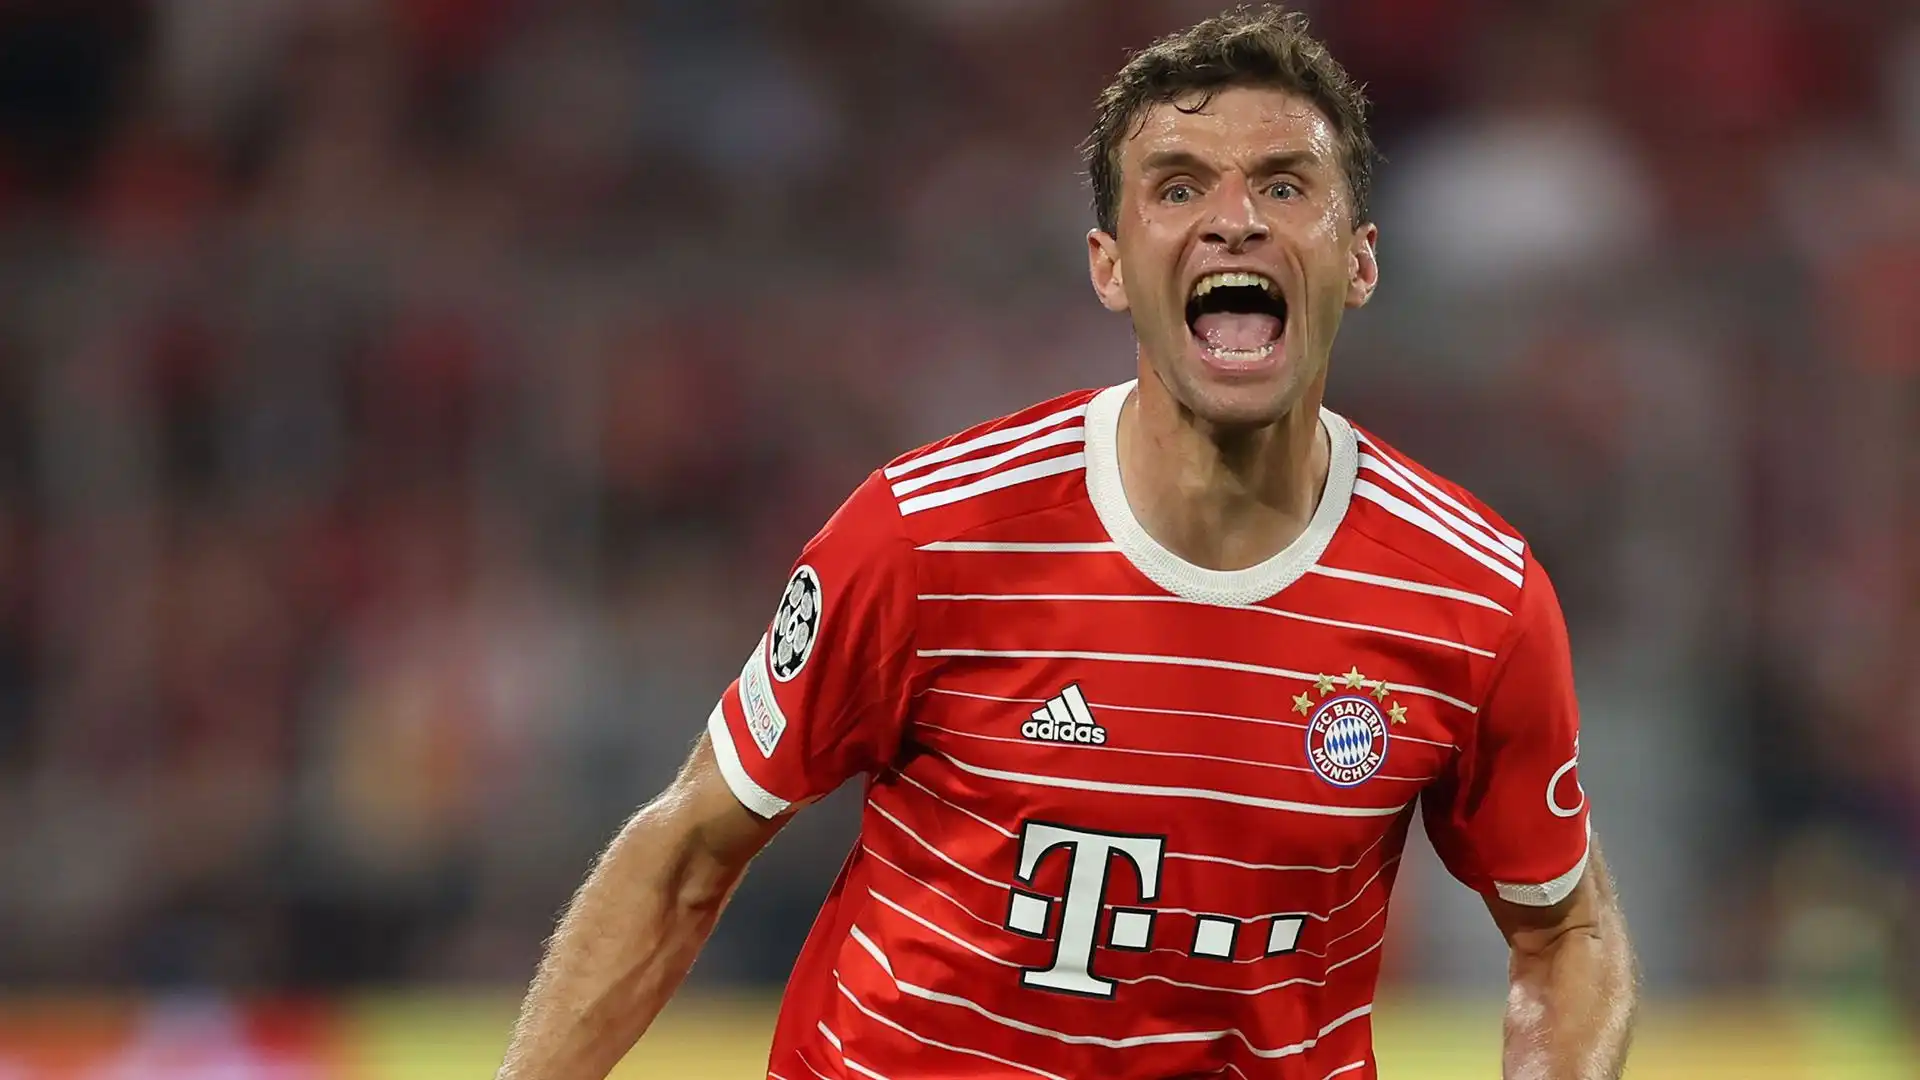 1 Thomas Müller: 263 assist in 688 partite